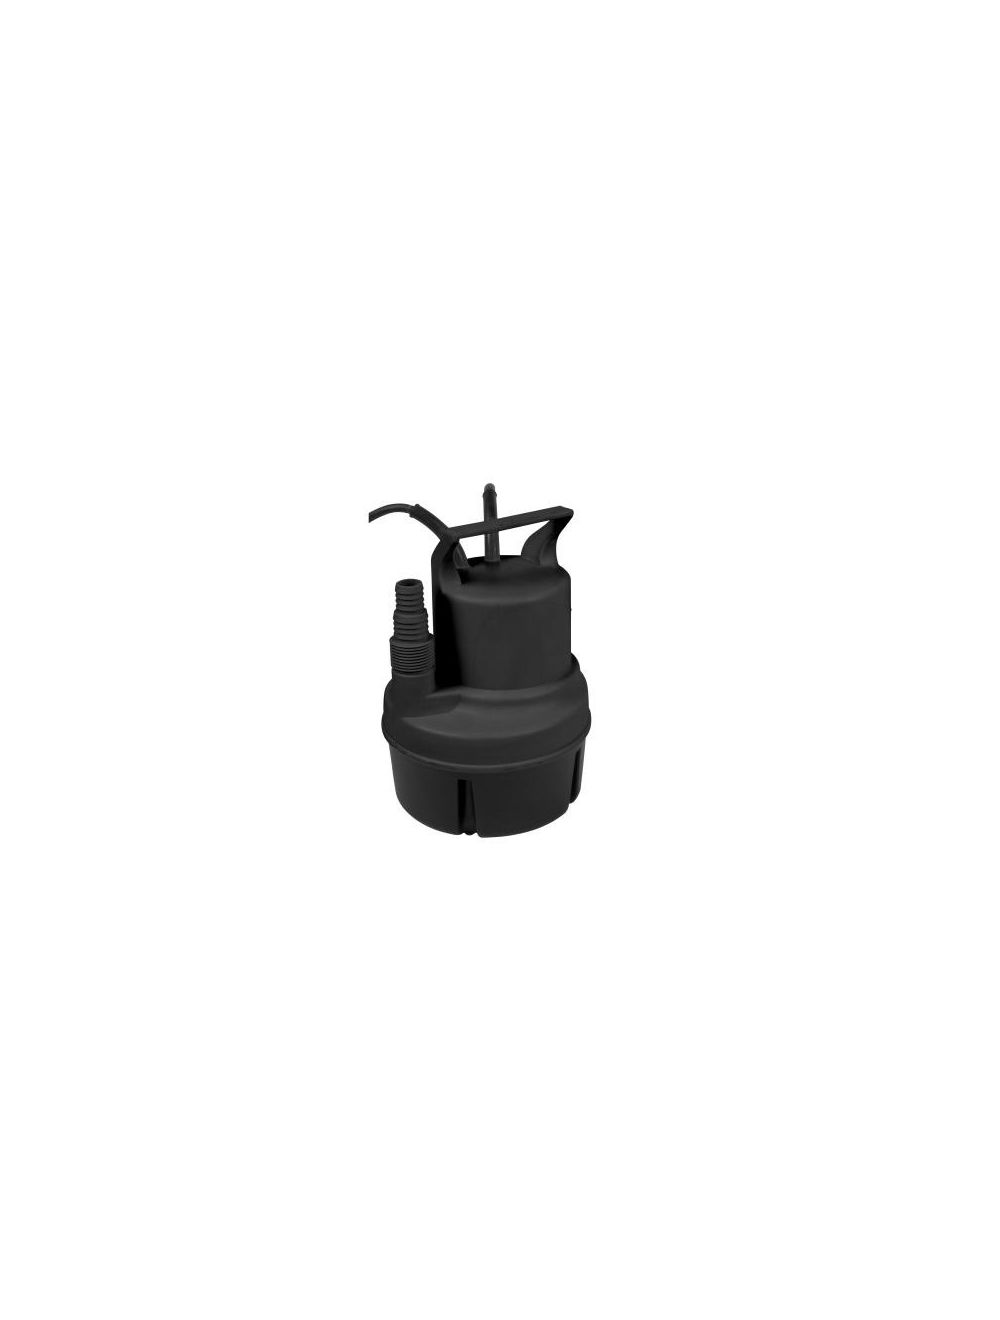 RP Pompe submersible 3500 on 